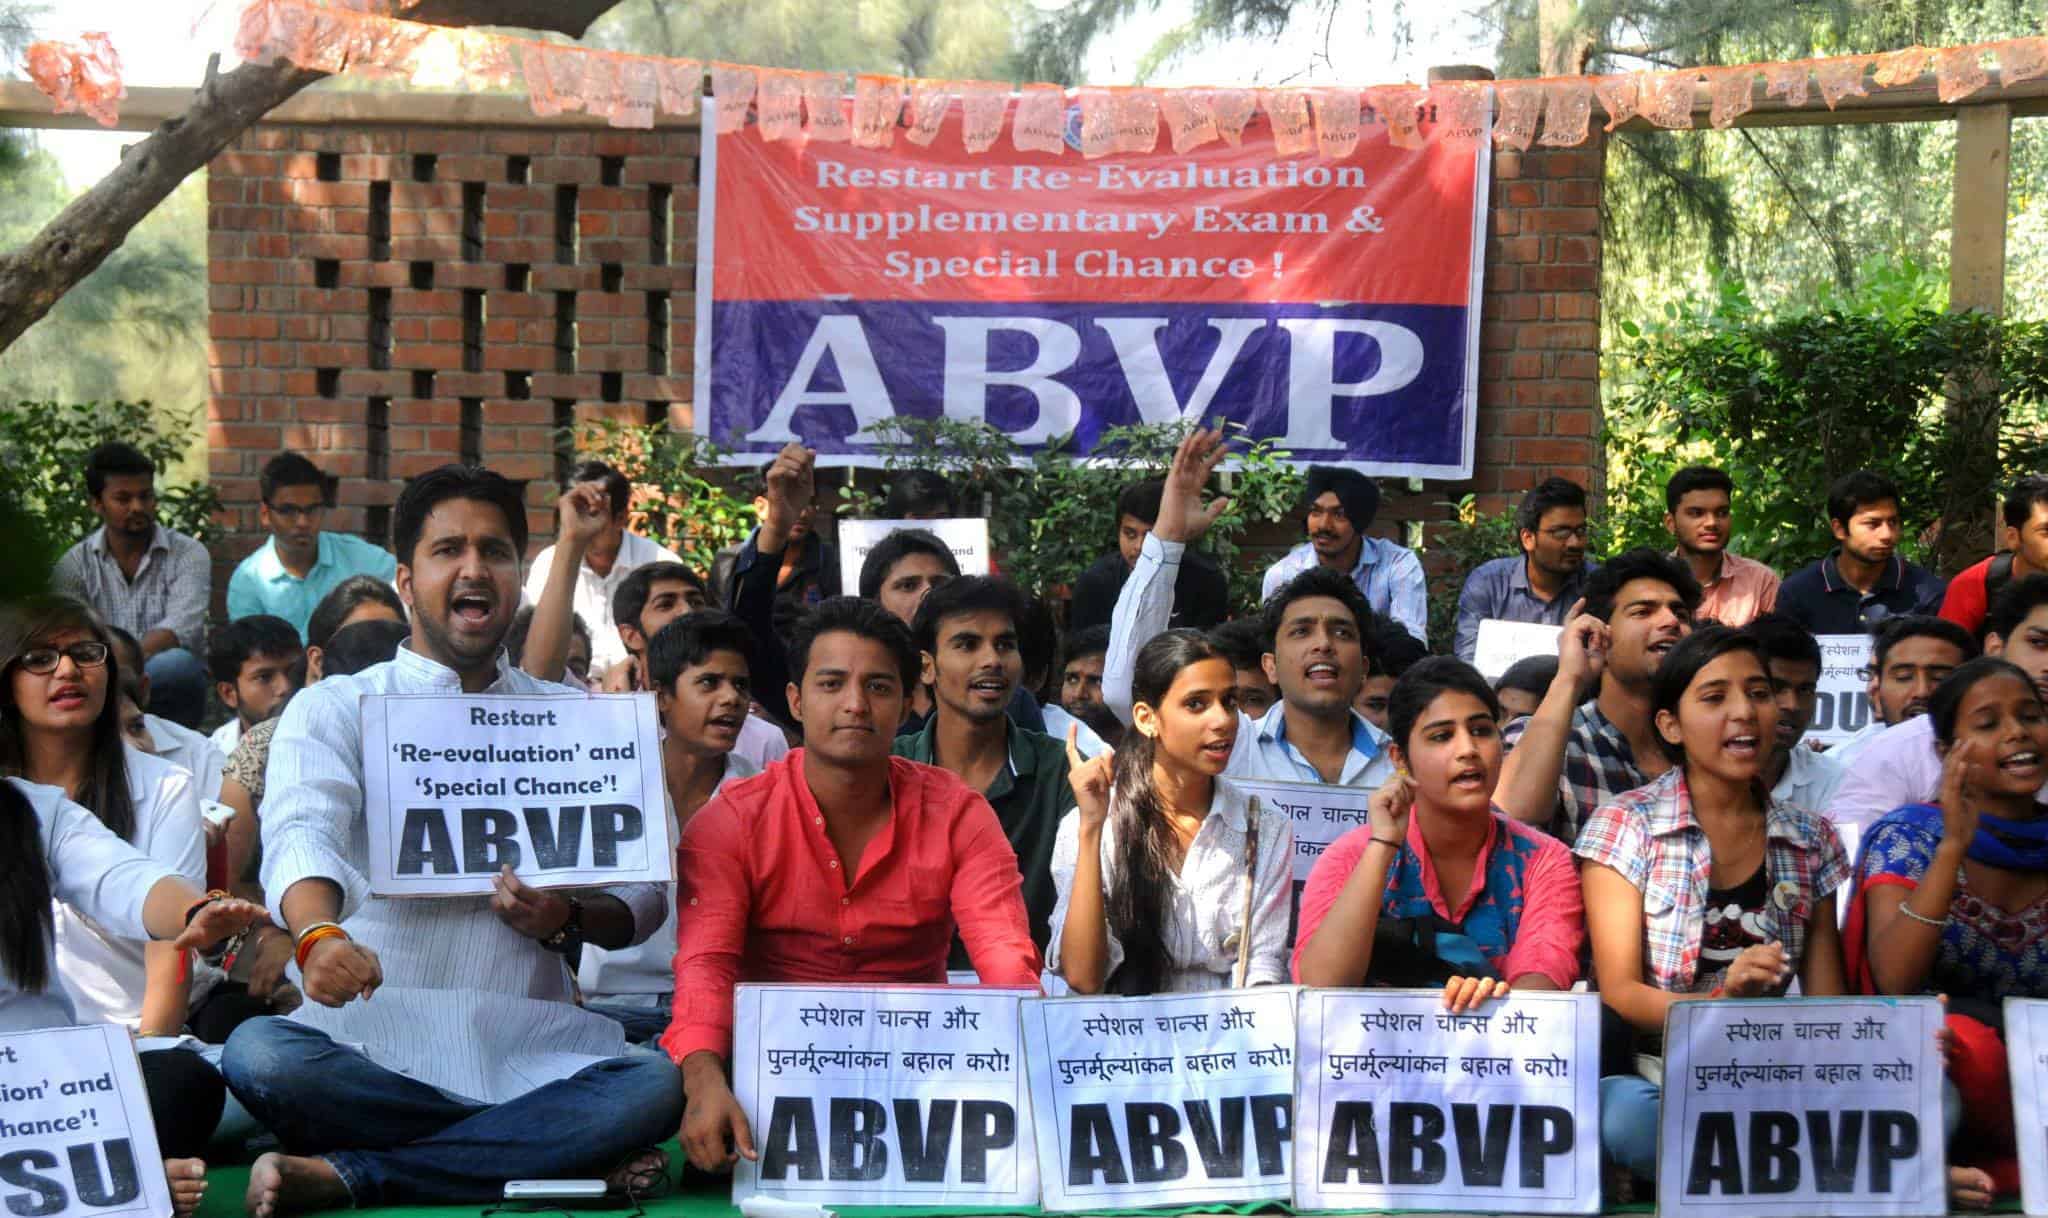 Glimpse of the dharna held last week. Image courtesy: ABVP Press Release